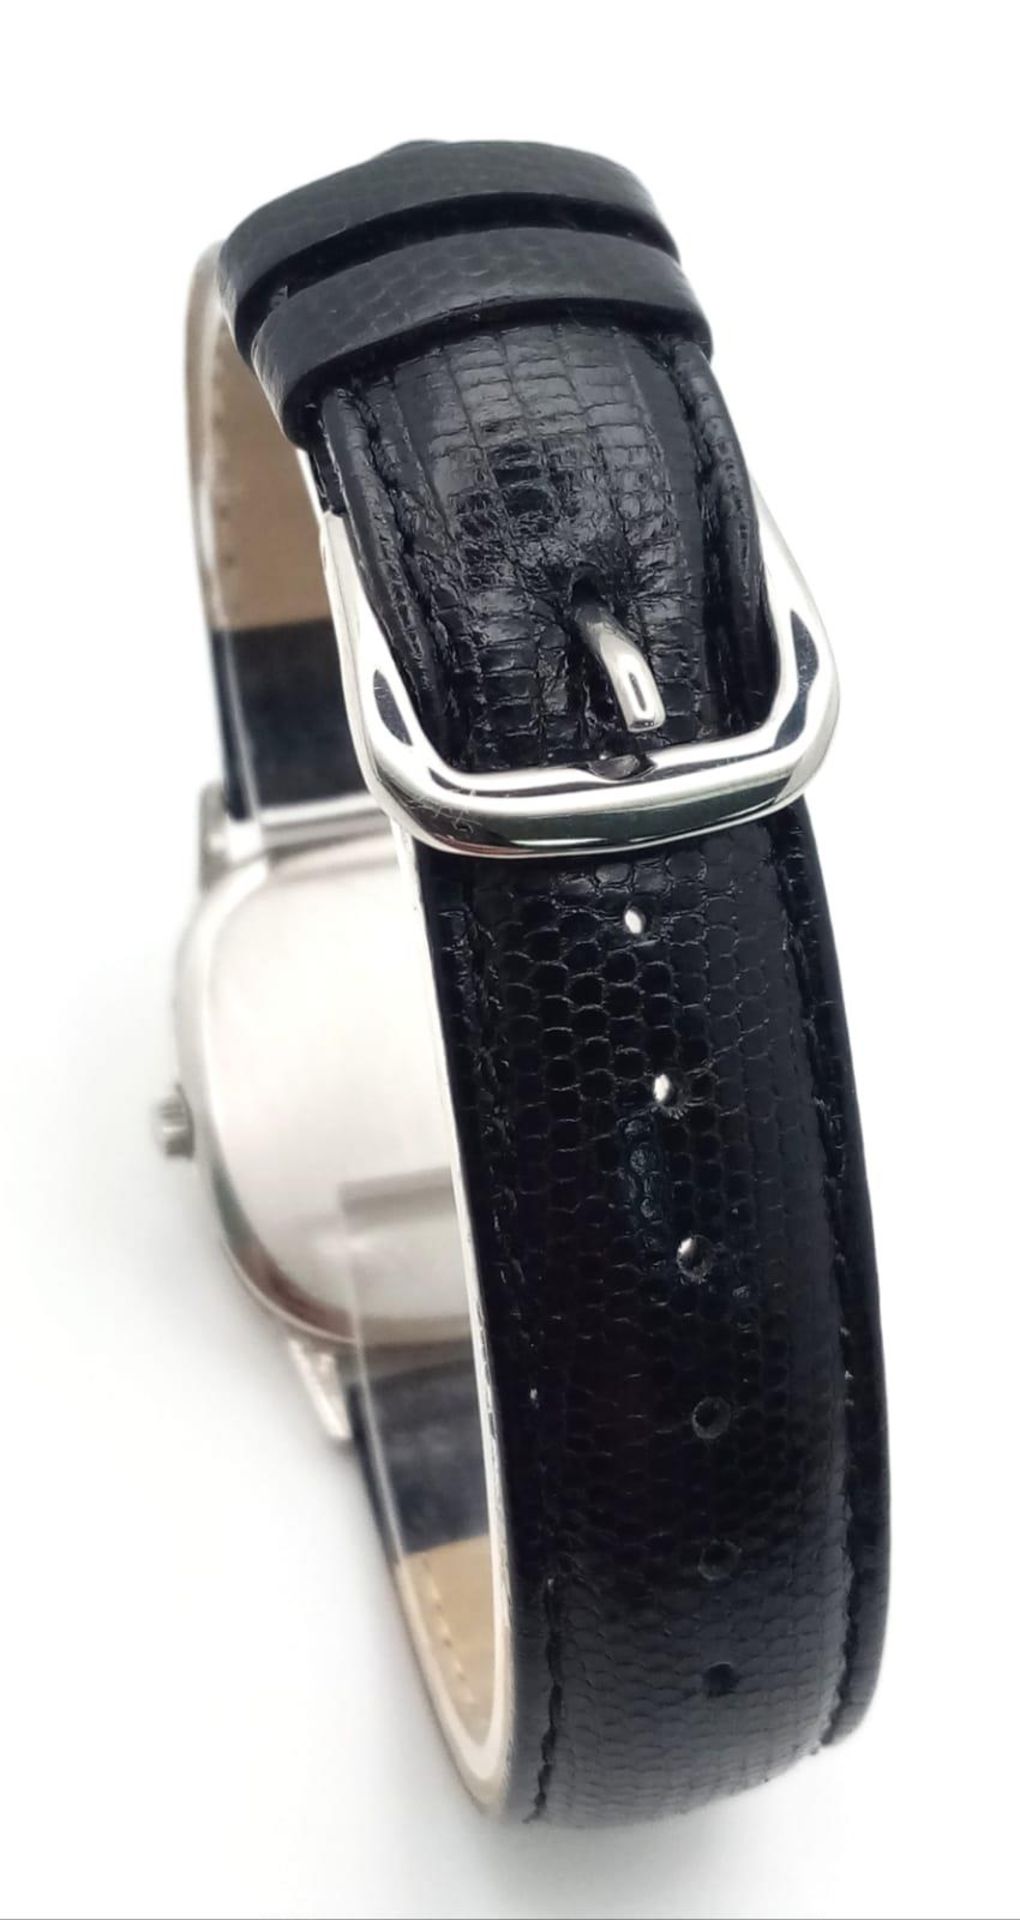 AN OMEGA DE VILLE IN STAINLESS STEEL WITH MANUAL WINDING MOVEMENT AND ON A BLACK LEATHER STRAP . - Image 5 of 6